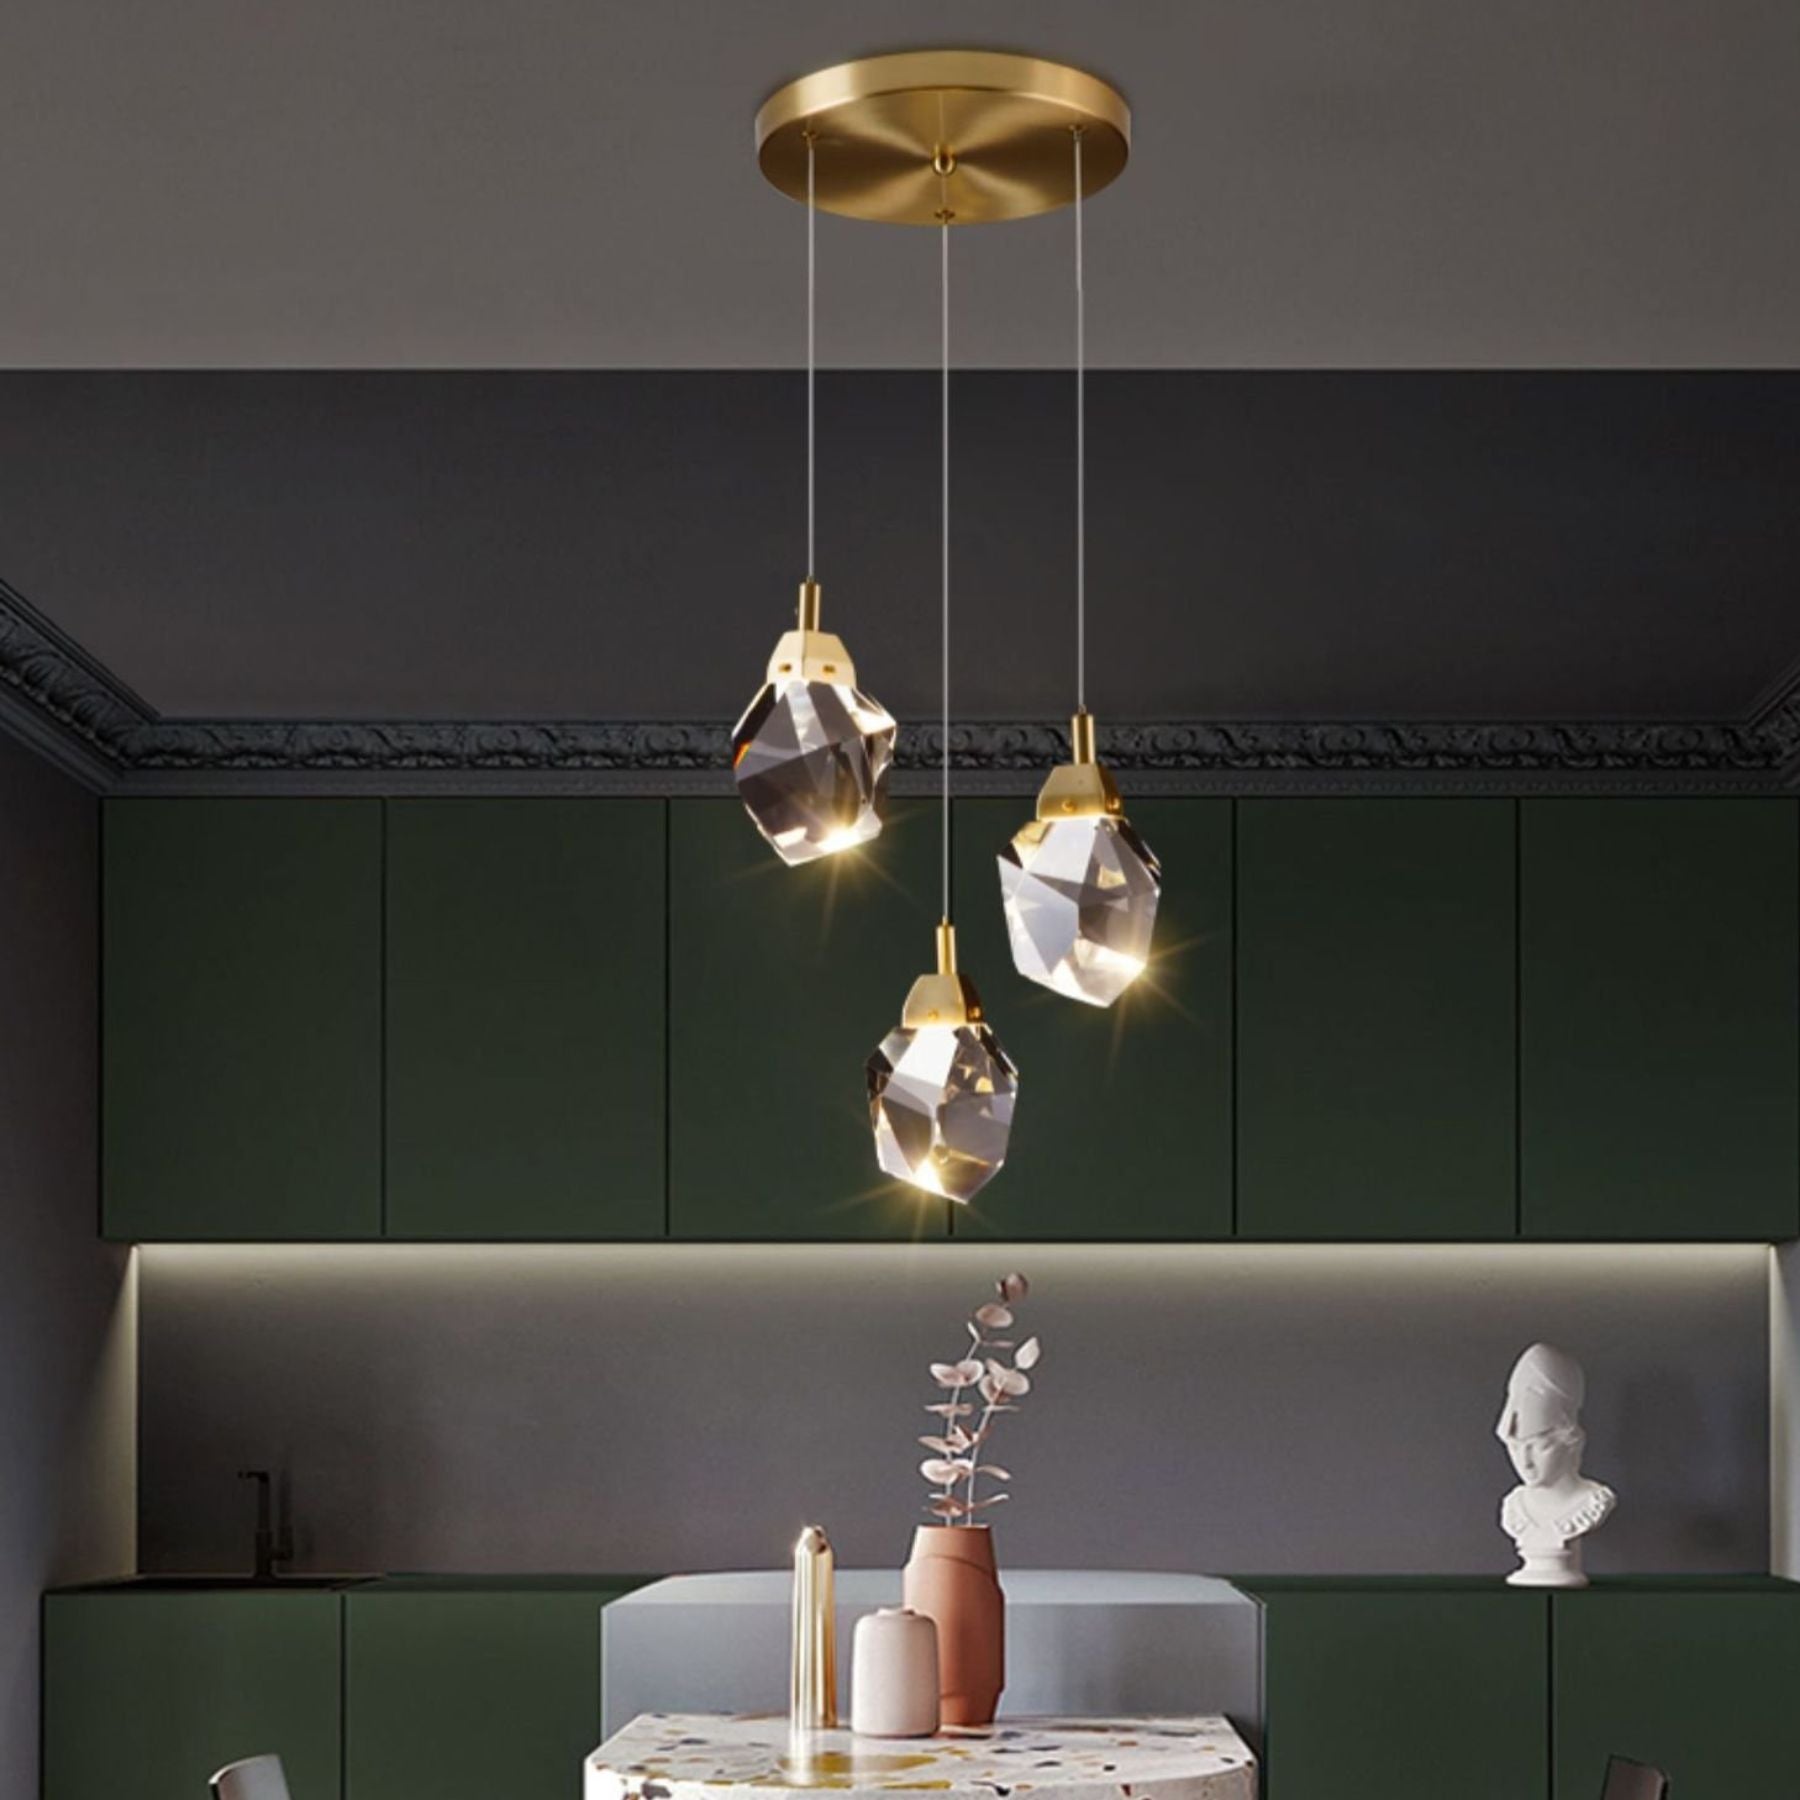 the sparkling crystal pendant lamp is gracefully designed with many lights creating a luxurious feeling